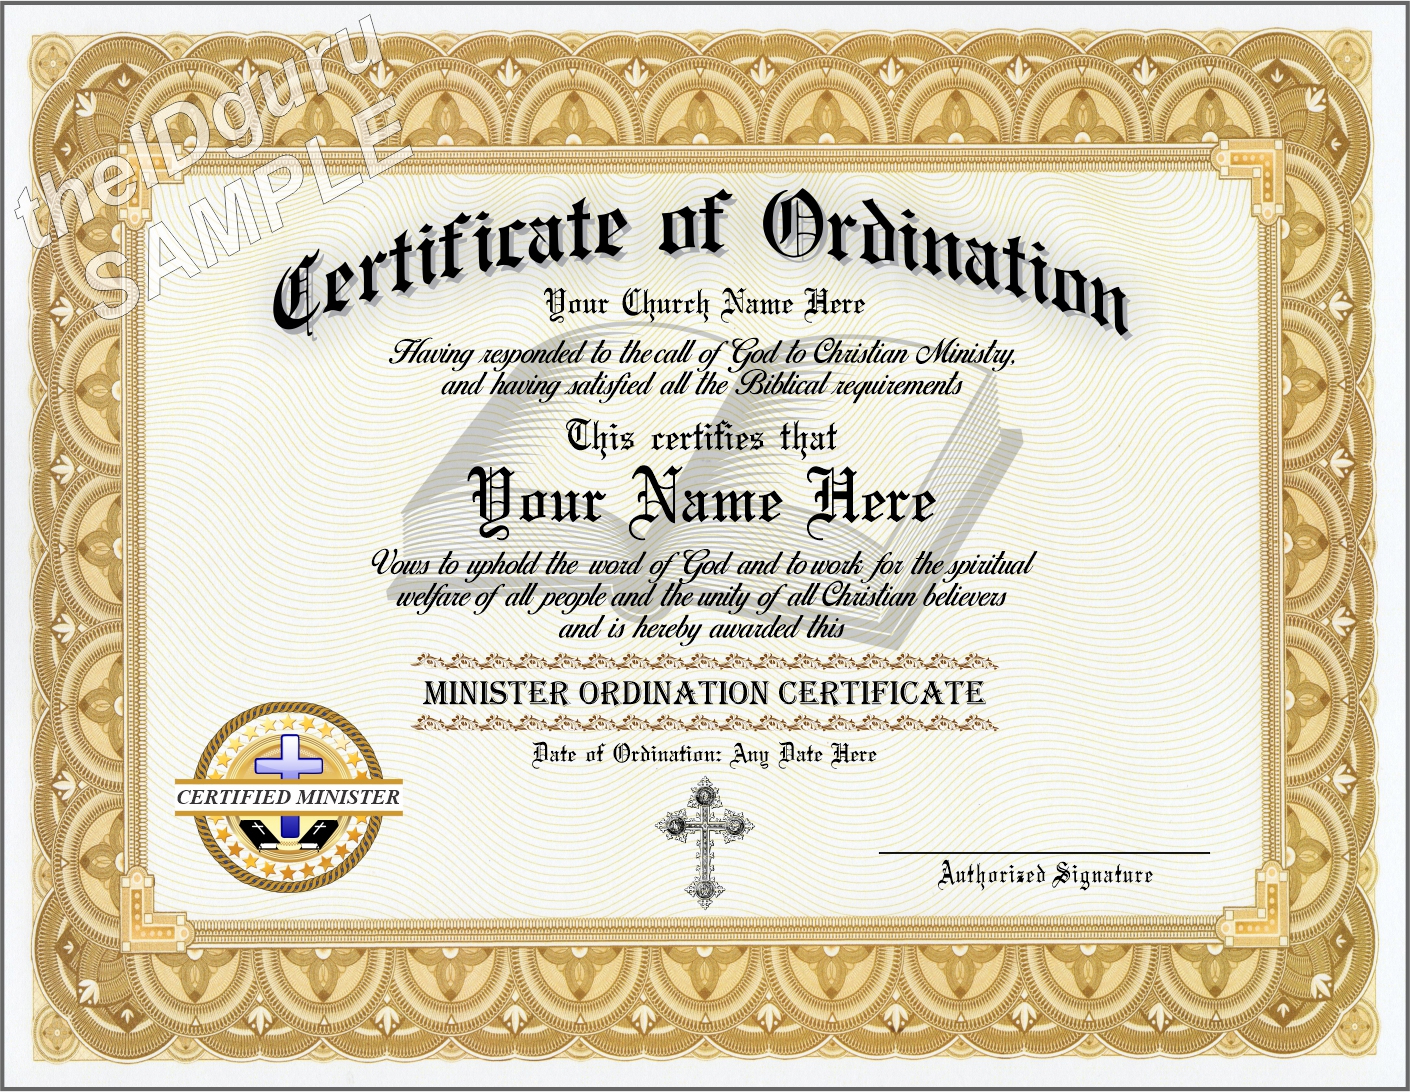 get-our-printable-minister-ordination-certificate-template